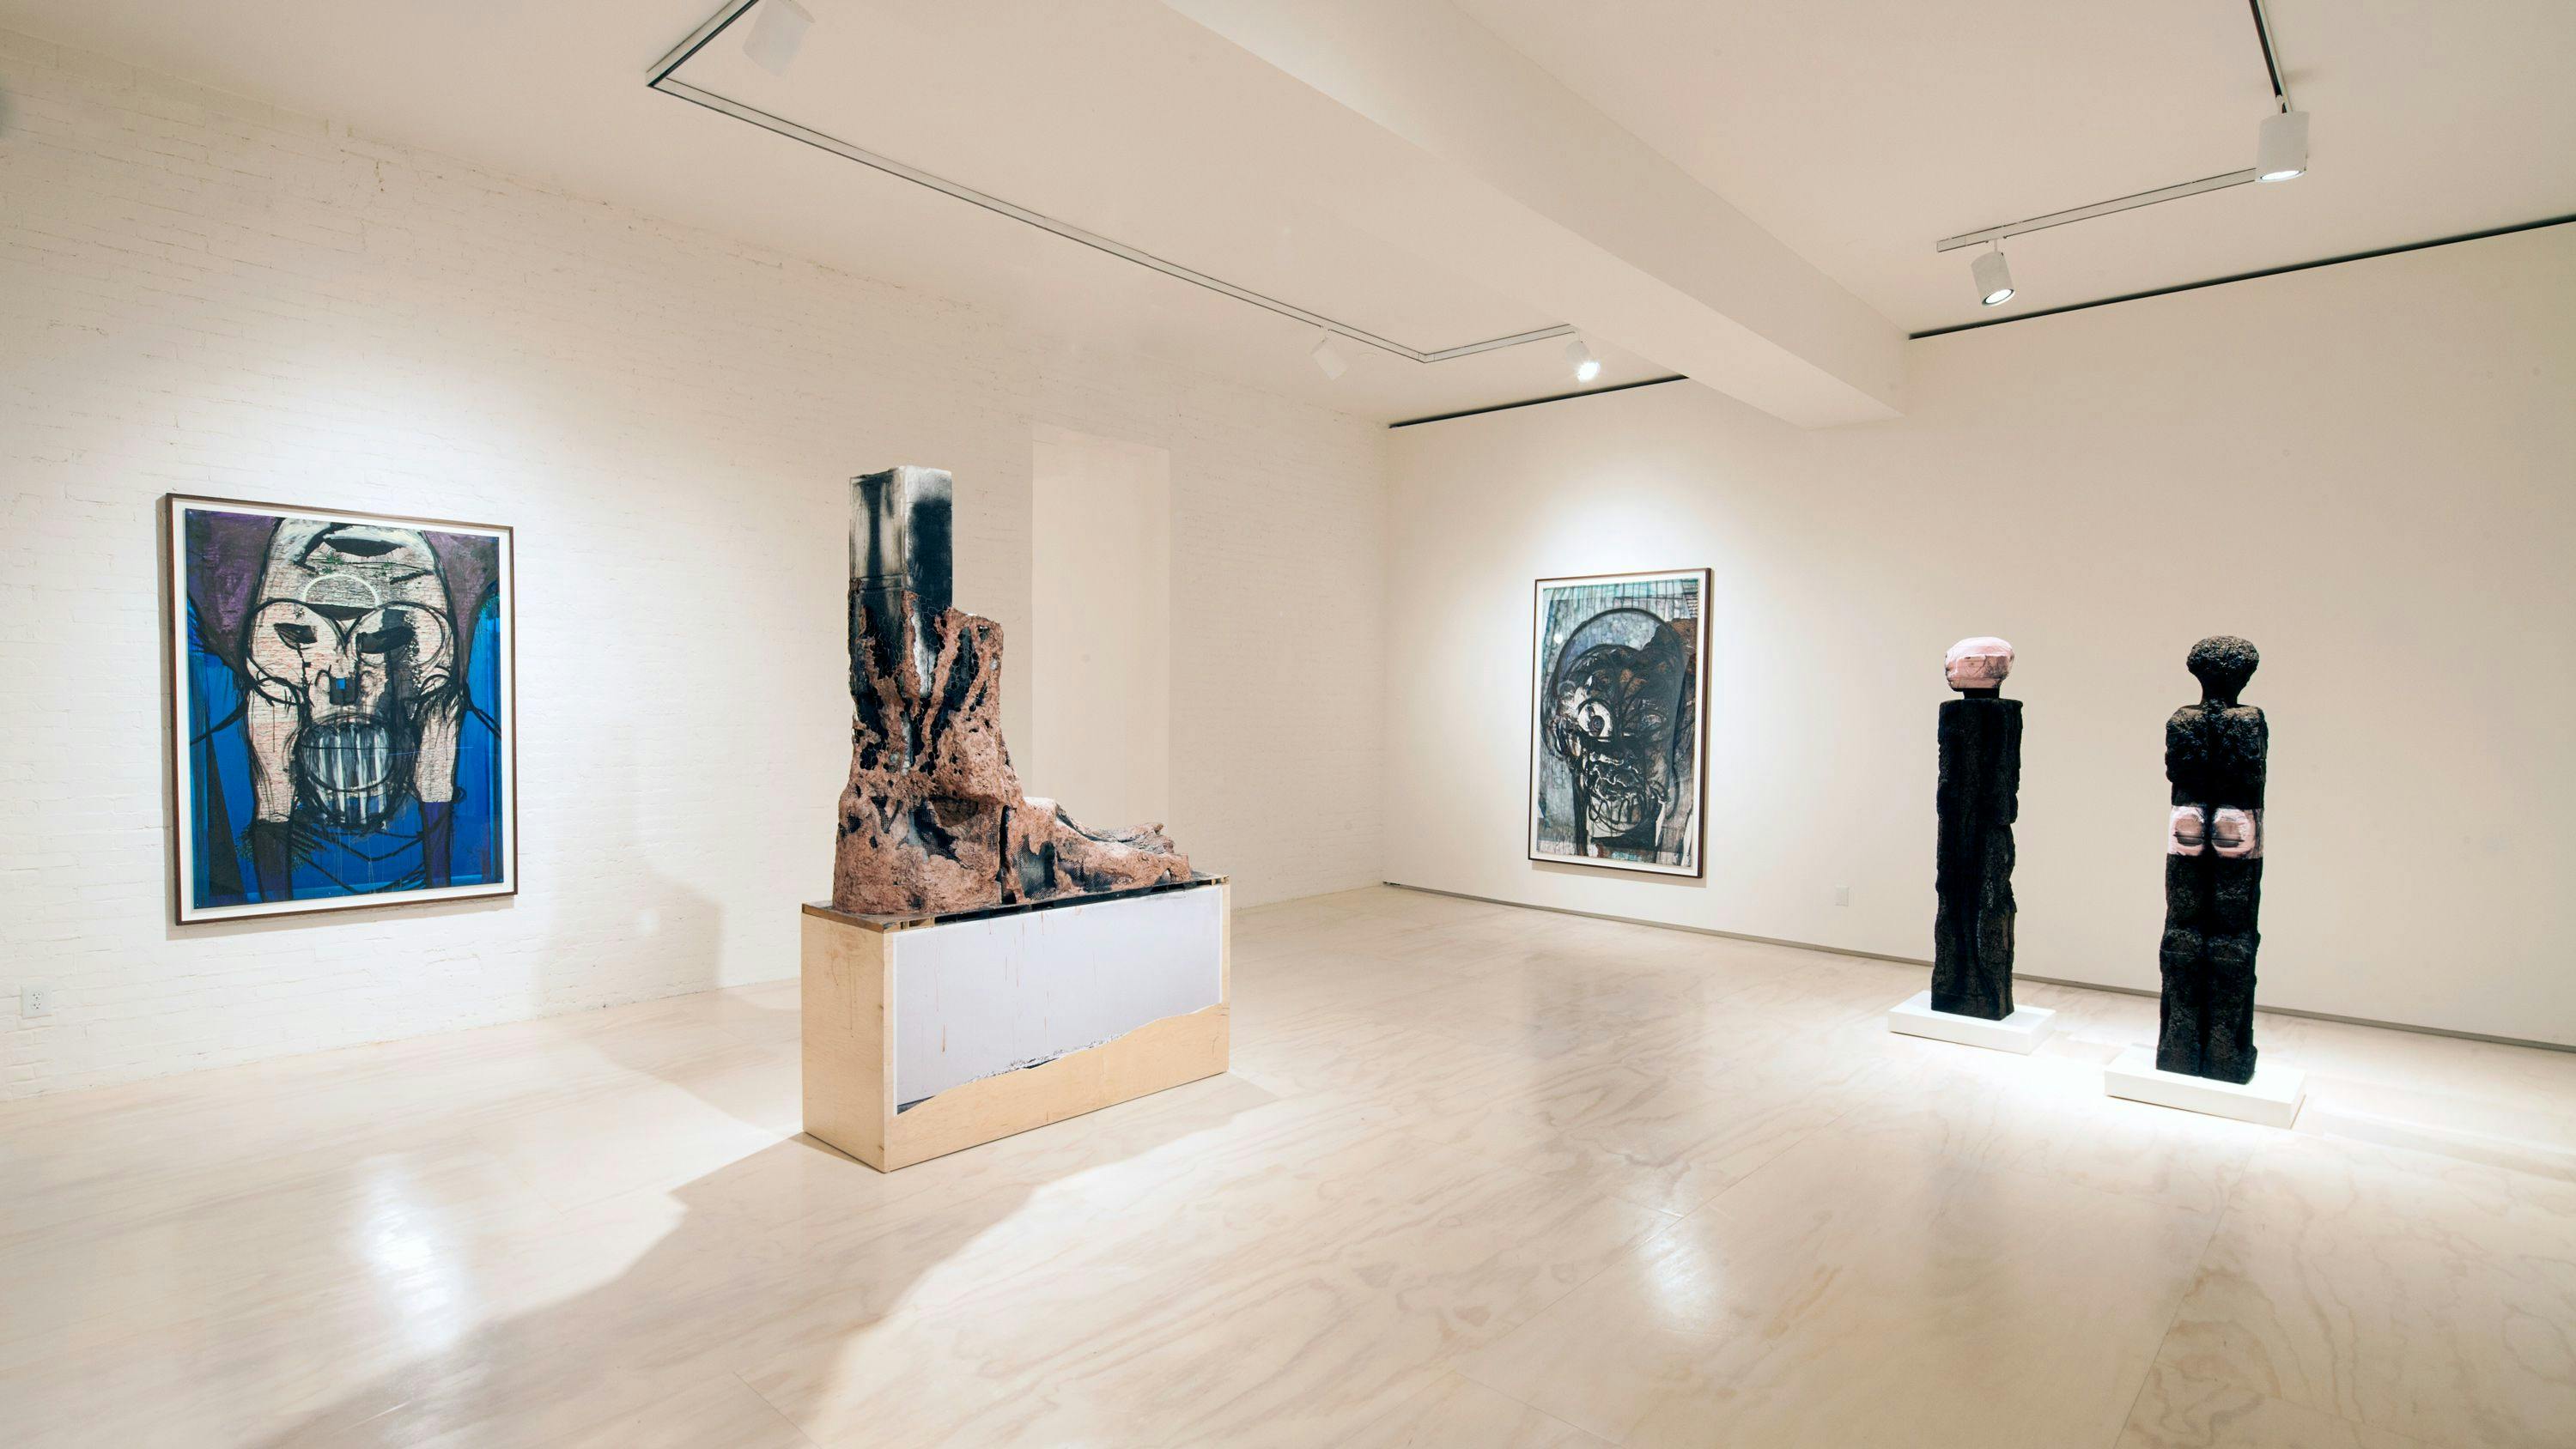 Installation view of the exhibition, Huma Bhabha: Unnatural Histories, at MoMA PS1 in Long Island City, NY, dated 2013. 